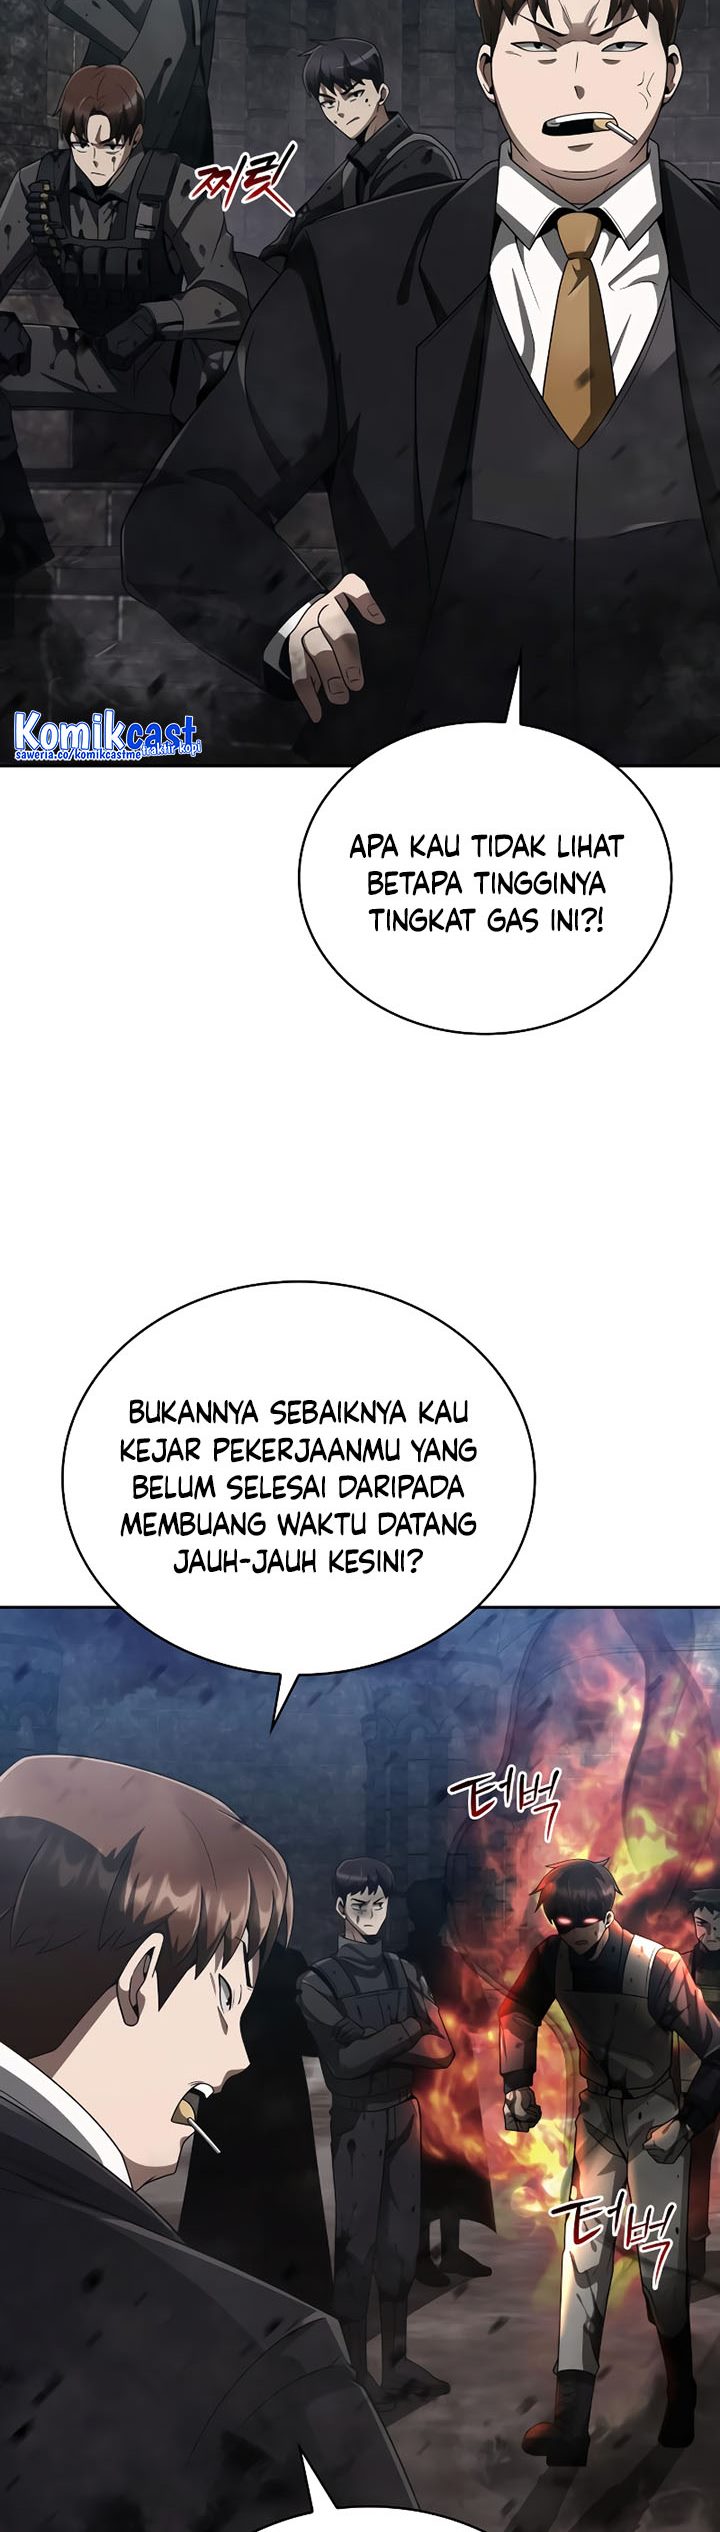 Dilarang COPAS - situs resmi www.mangacanblog.com - Komik clever cleaning life of the returned genius hunter 016 - chapter 16 17 Indonesia clever cleaning life of the returned genius hunter 016 - chapter 16 Terbaru 20|Baca Manga Komik Indonesia|Mangacan